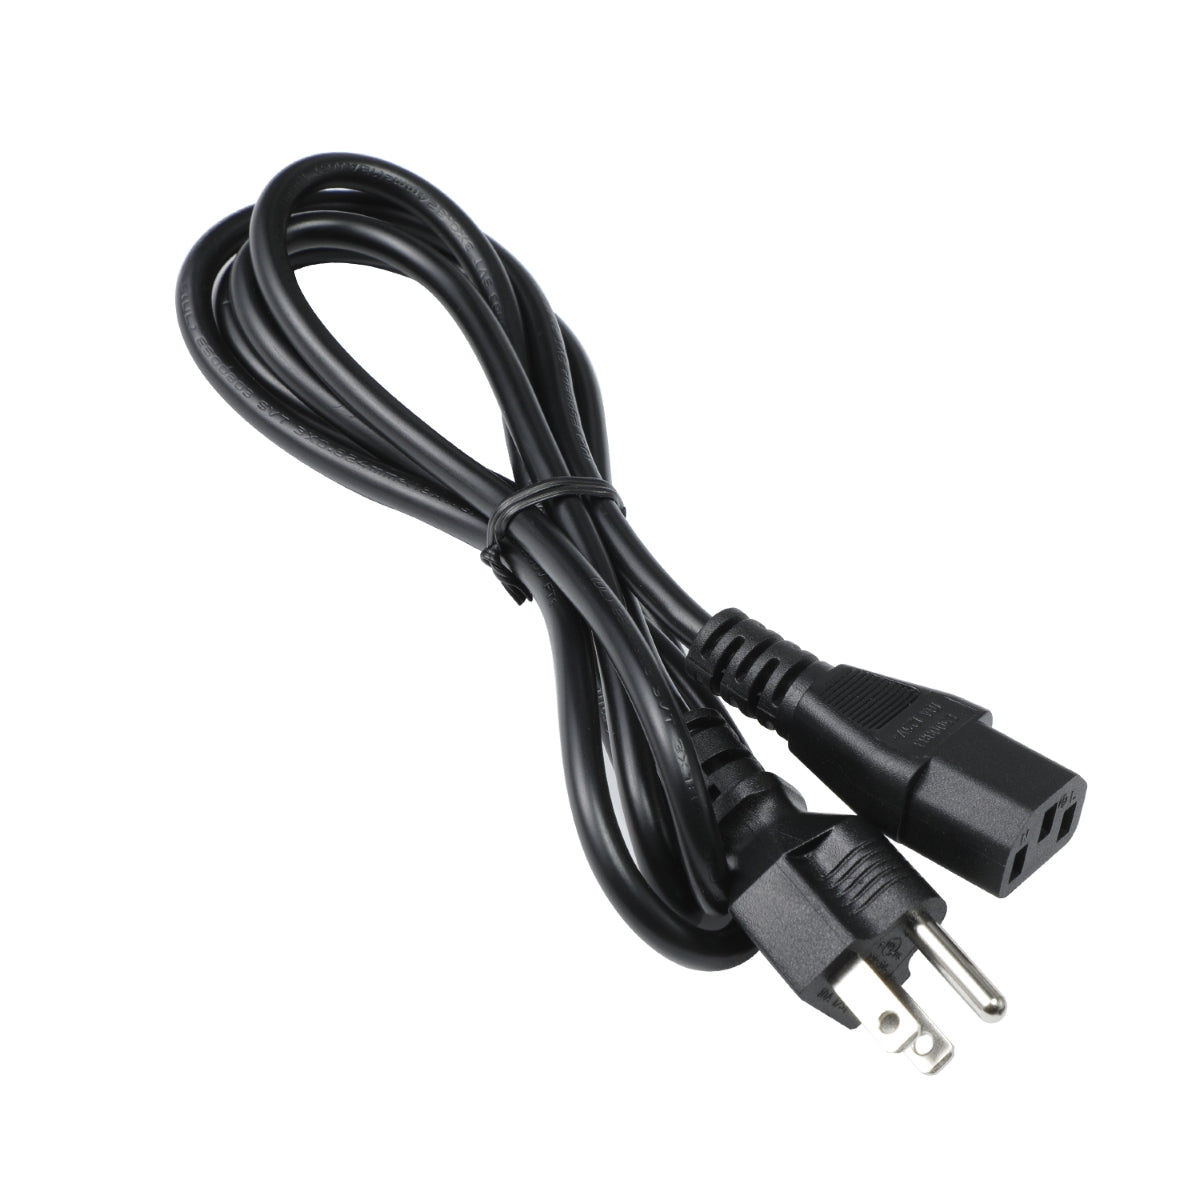 Power Cord for Acer XB271HU Bmiprz Monitor